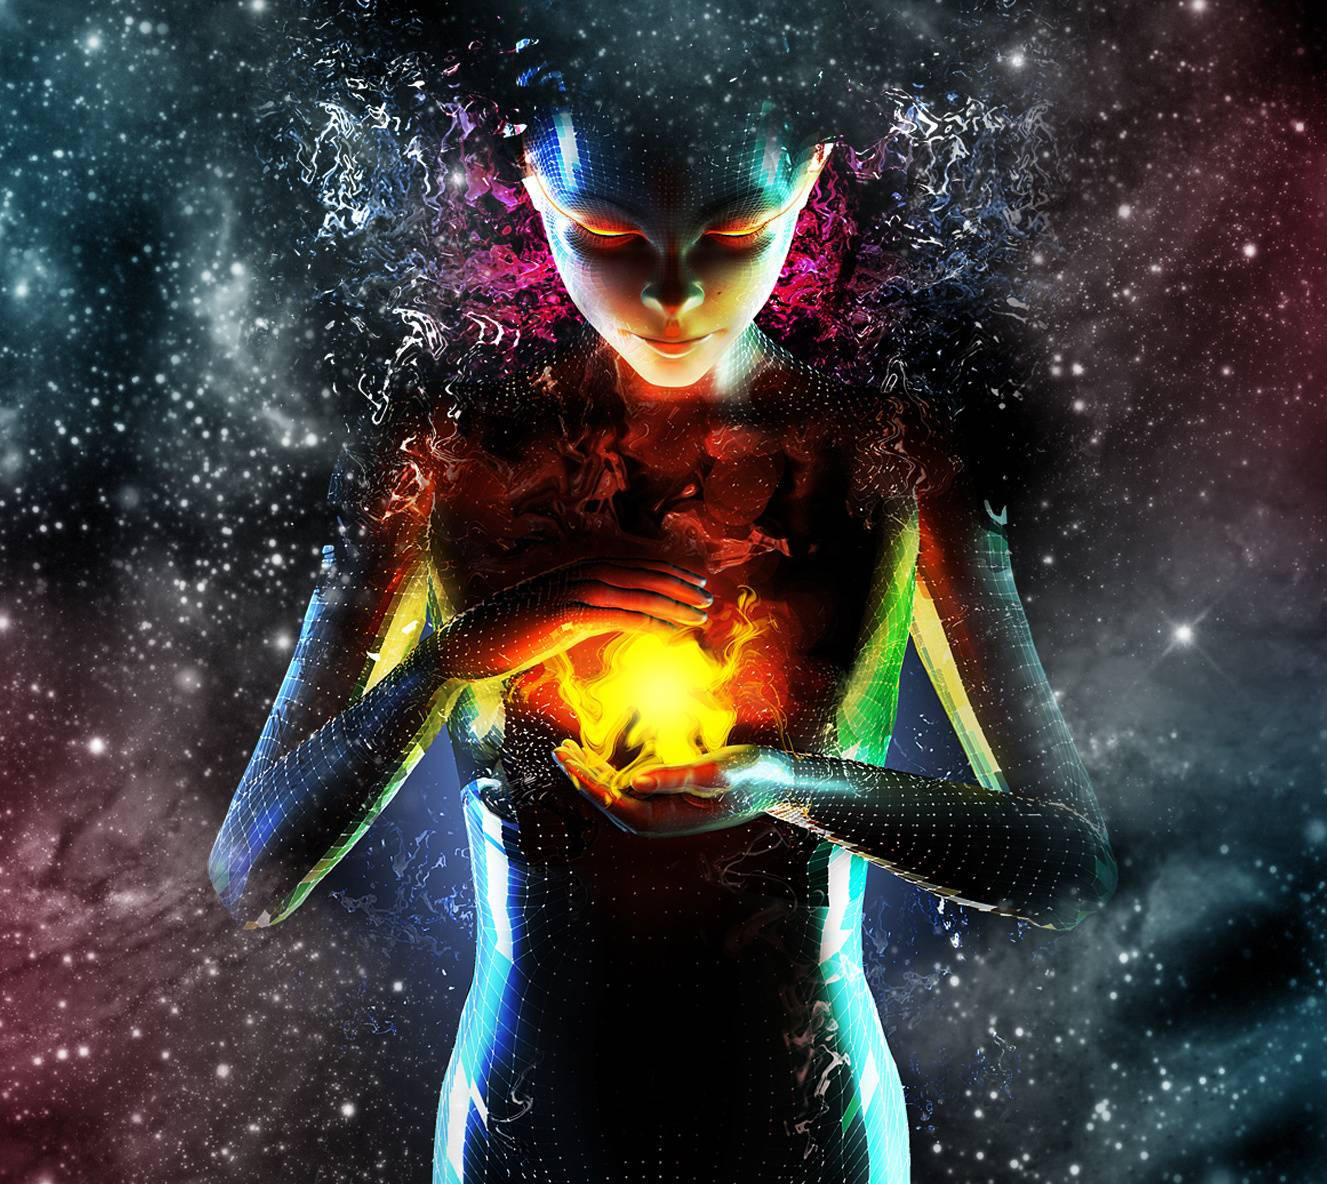 Spiritual Aesthetic Woman With Fire Background